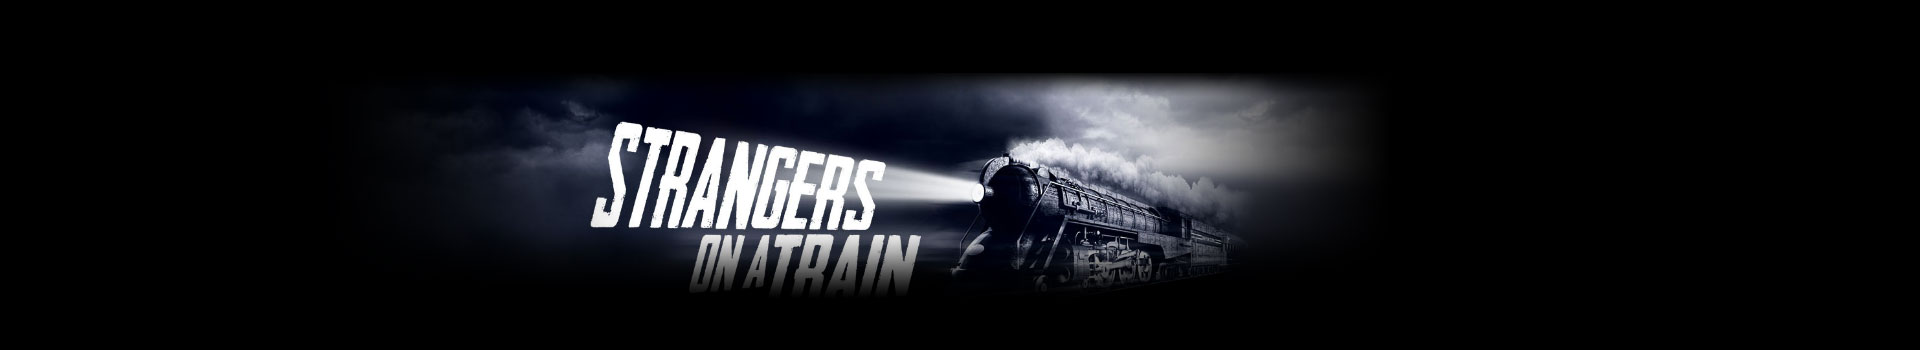 Strangers On A Train banner image